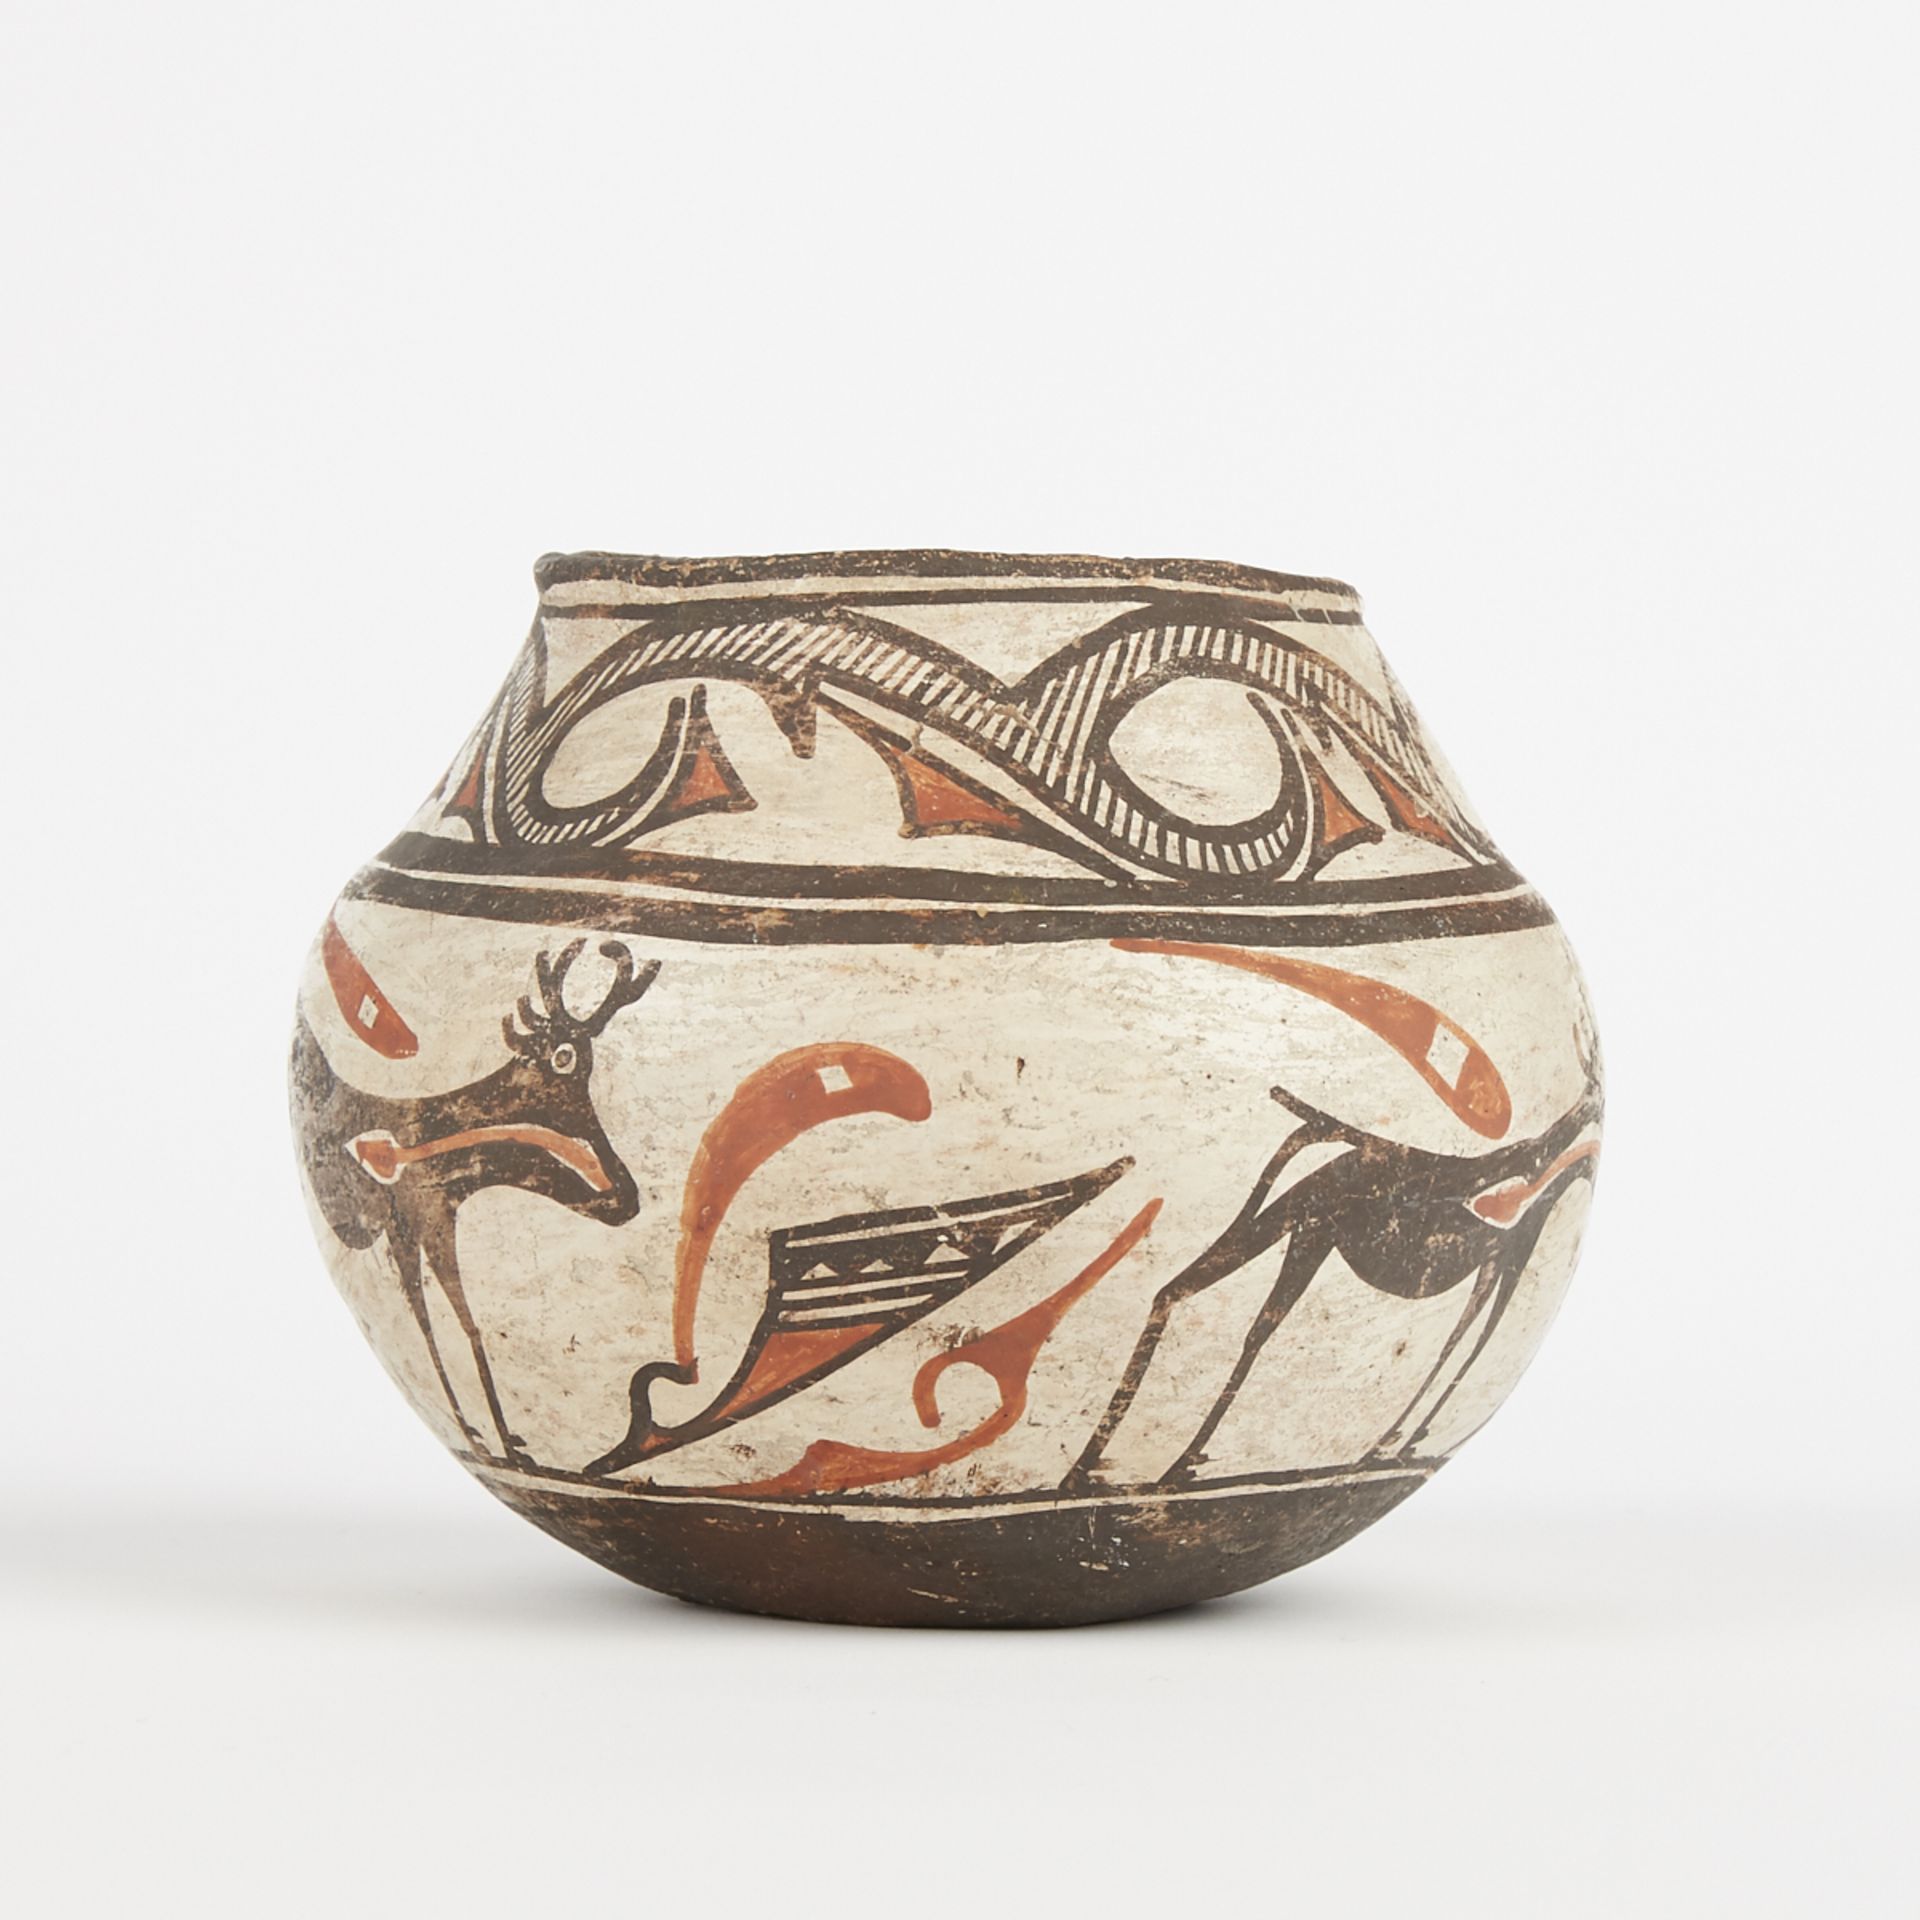 Early Zuni Pueblo Child's Olla Pottery Water Jar - Image 3 of 5